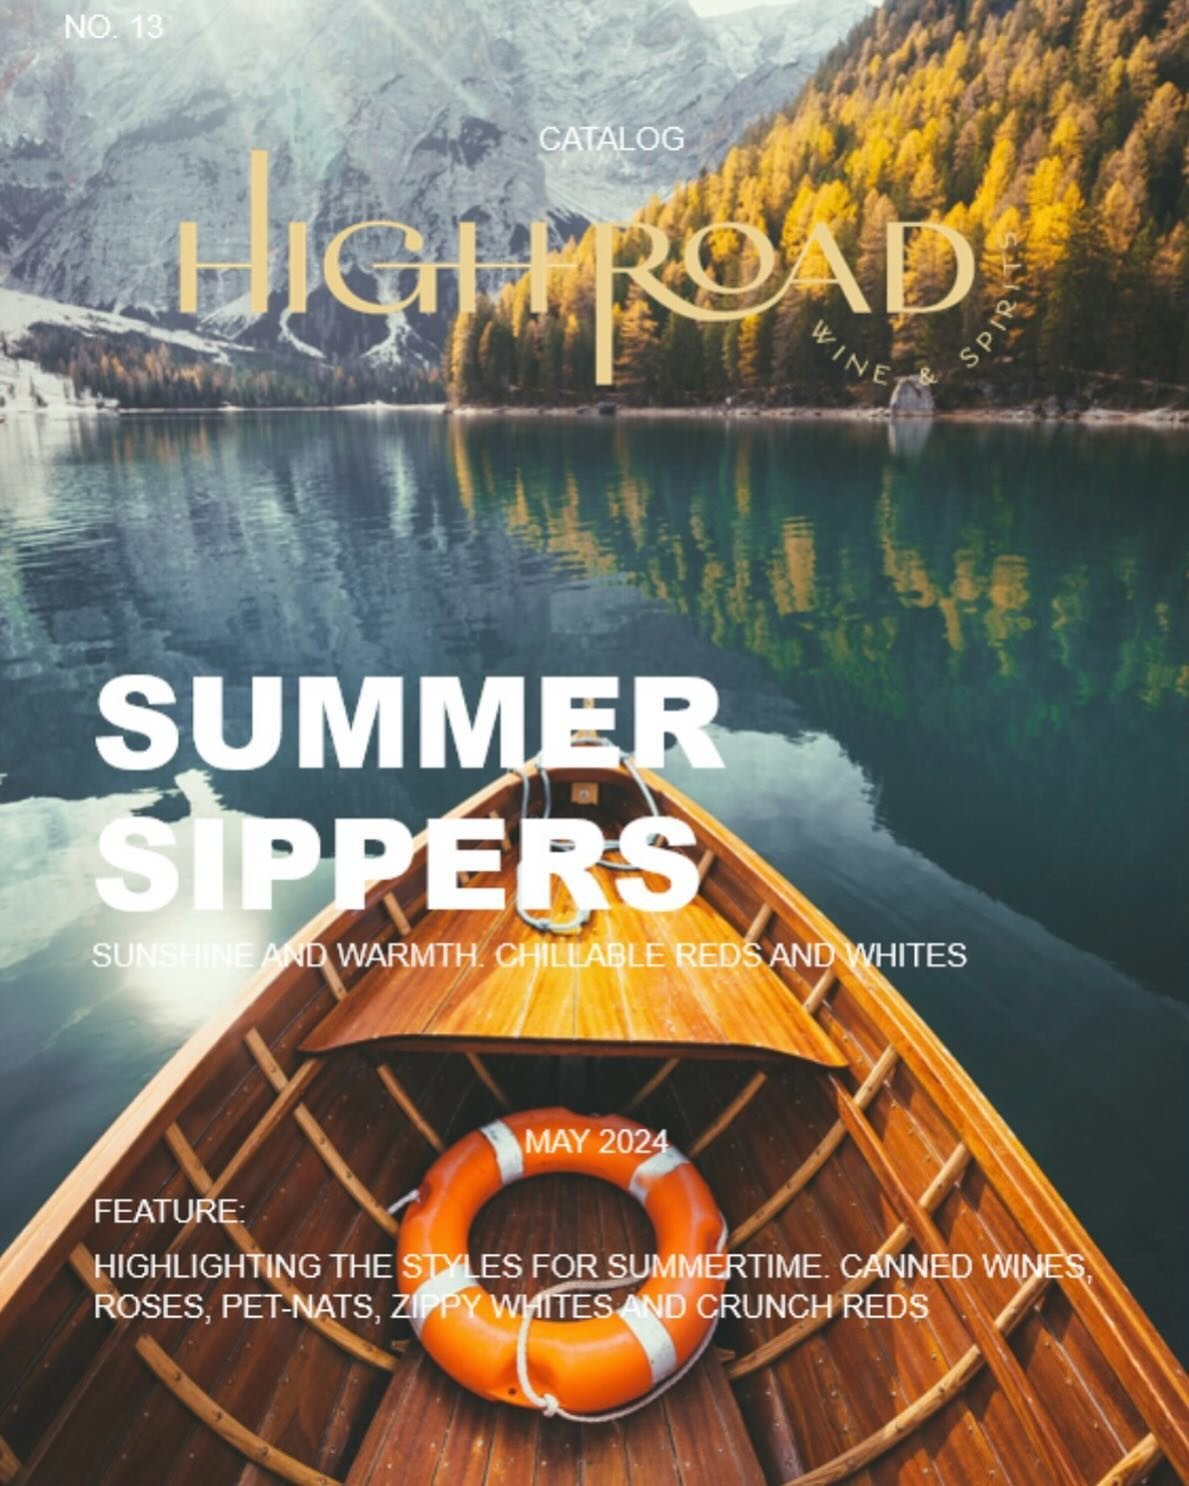 New month, new flipbook feature! Our May Price Book is now live, along with the monthly flipbook feature on our site. This month&rsquo;s topic? Summer Highlights. With sun-drenched days just around the corner, we&rsquo;re gearing up for barbecues, pi